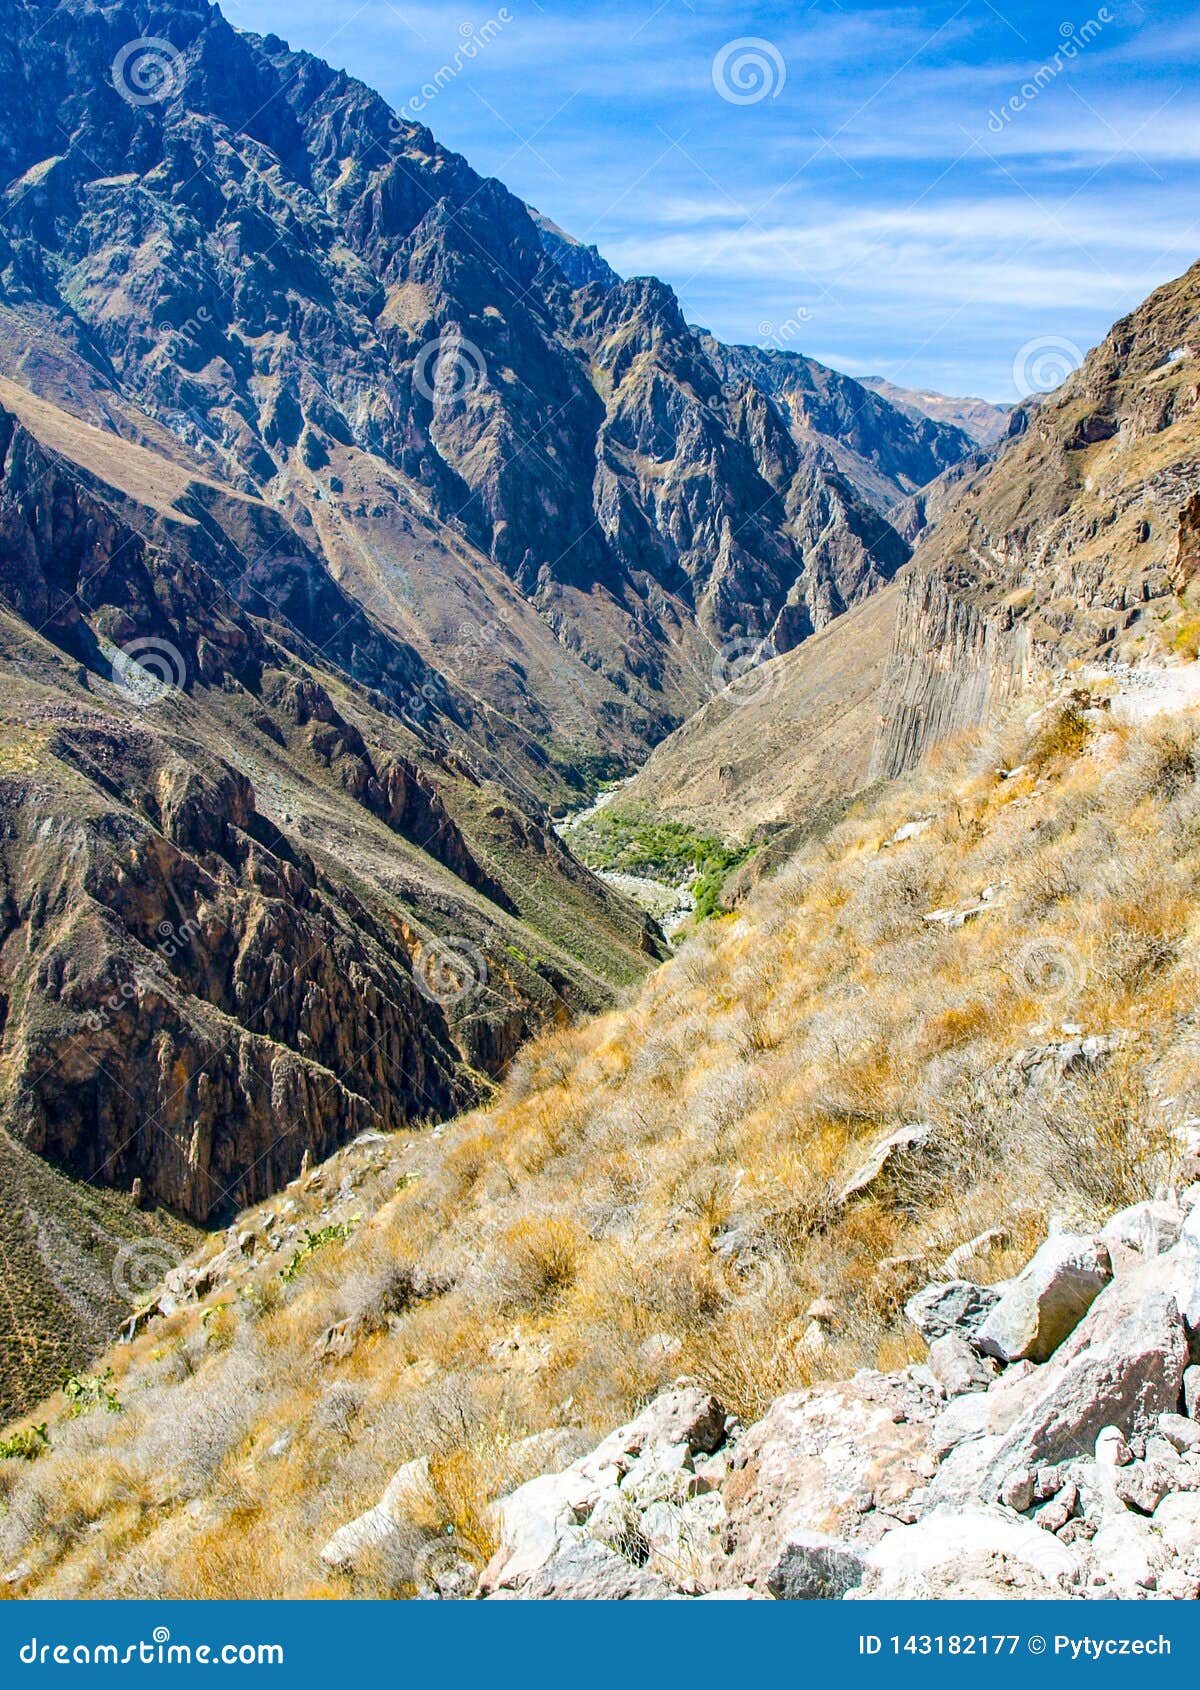 Colca Canyon The Deepest Canyon Of The World Peru South America